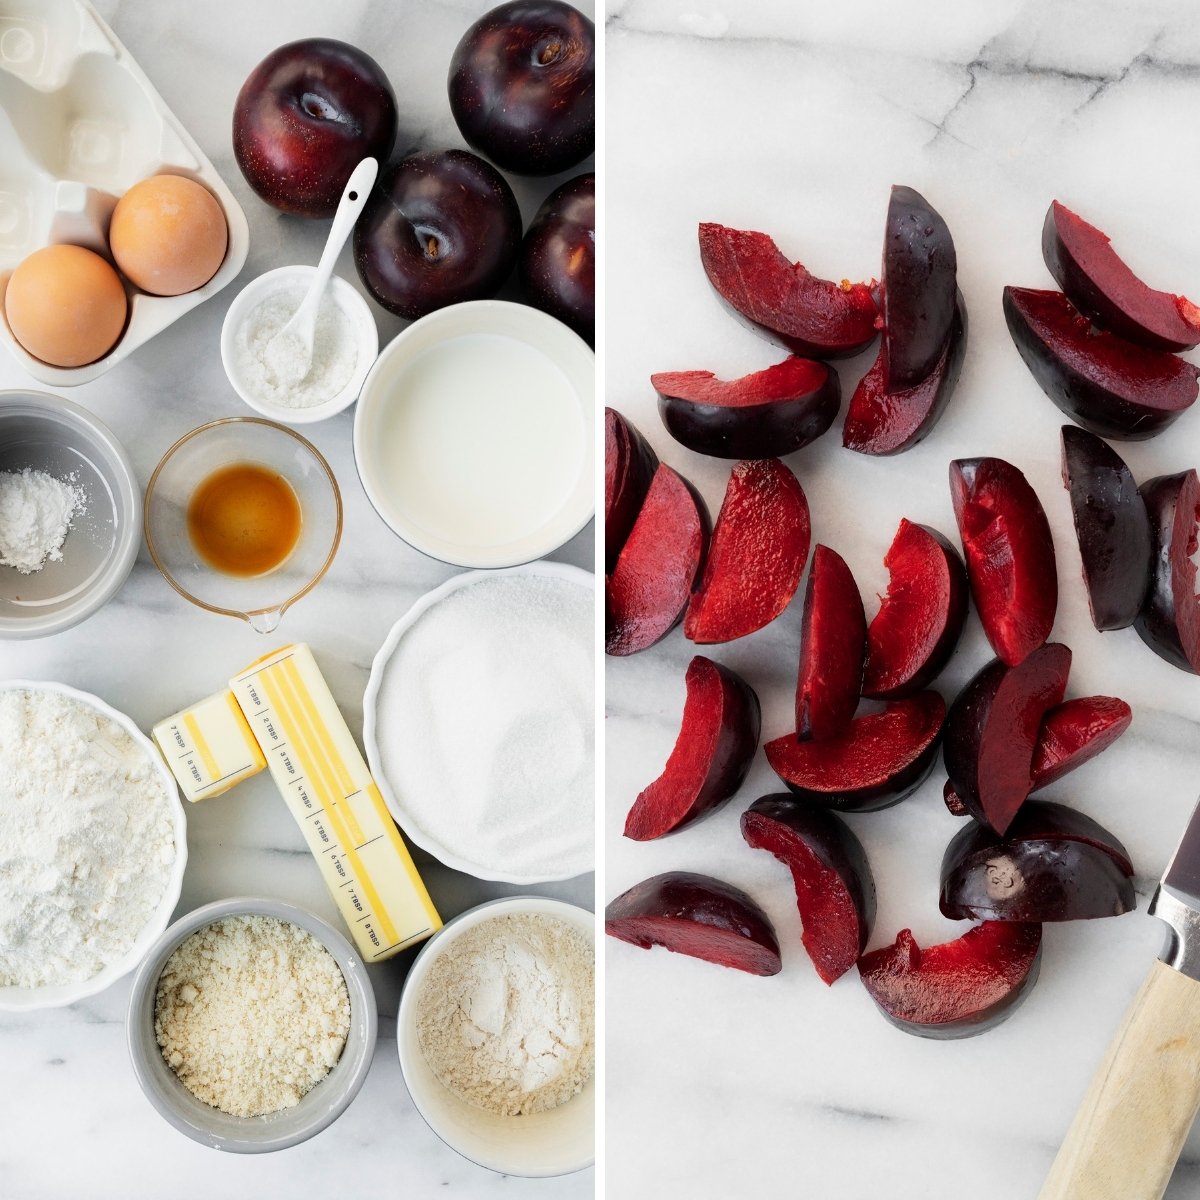 ingredients for plum cake, including sliced fresh red plums